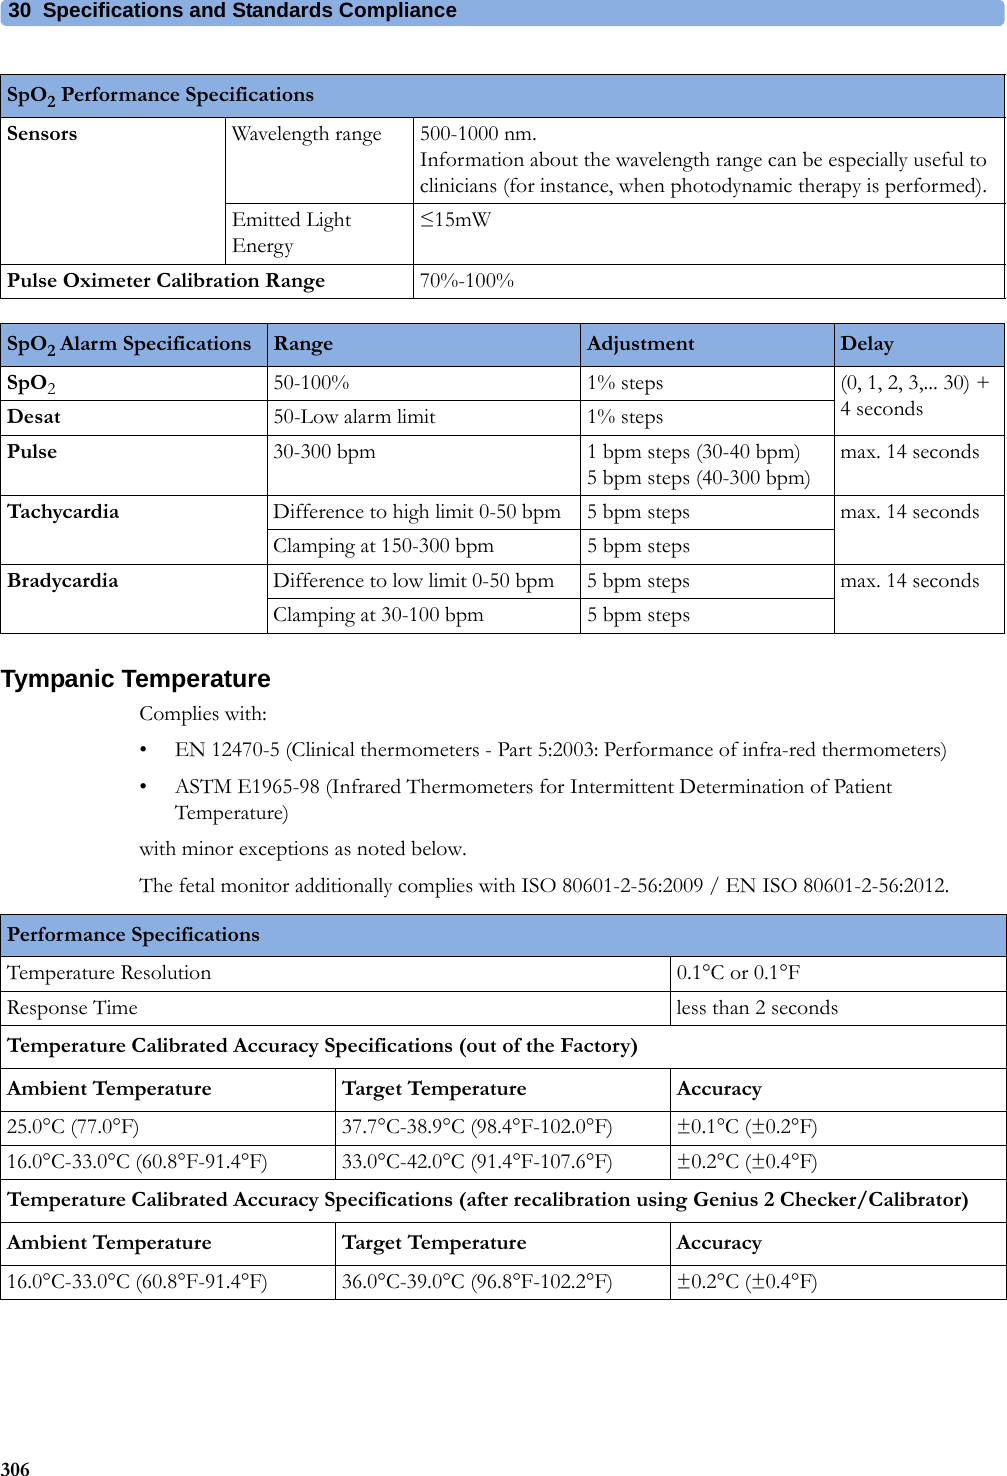 30  Specifications and Standards Compliance306Tympanic TemperatureComplies with:• EN 12470-5 (Clinical thermometers - Part 5:2003: Performance of infra-red thermometers)• ASTM E1965-98 (Infrared Thermometers for Intermittent Determination of Patient Temperature)with minor exceptions as noted below.The fetal monitor additionally complies with ISO 80601-2-56:2009 / EN ISO 80601-2-56:2012.Sensors Wavelength range 500-1000 nm. Information about the wavelength range can be especially useful to clinicians (for instance, when photodynamic therapy is performed).Emitted Light Energy≤15mWPulse Oximeter Calibration Range 70%-100%SpO2 Performance Specifications SpO2 Alarm Specifications Range Adjustment DelaySpO250-100% 1% steps (0, 1, 2, 3,... 30) + 4 secondsDesat 50-Low alarm limit 1% stepsPulse 30-300 bpm 1 bpm steps (30-40 bpm) 5 bpm steps (40-300 bpm)max. 14 secondsTachycardia Difference to high limit 0-50 bpm 5 bpm steps max. 14 secondsClamping at 150-300 bpm 5 bpm stepsBradycardia Difference to low limit 0-50 bpm 5 bpm steps max. 14 secondsClamping at 30-100 bpm 5 bpm stepsPerformance SpecificationsTemperature Resolution 0.1°C or 0.1°FResponse Time less than 2 secondsTemperature Calibrated Accuracy Specifications (out of the Factory)Ambient Temperature Target Temperature Accuracy25.0°C (77.0°F) 37.7°C-38.9°C (98.4°F-102.0°F) ±0.1°C (±0.2°F)16.0°C-33.0°C (60.8°F-91.4°F) 33.0°C-42.0°C (91.4°F-107.6°F) ±0.2°C (±0.4°F)Temperature Calibrated Accuracy Specifications (after recalibration using Genius 2 Checker/Calibrator)Ambient Temperature Target Temperature Accuracy16.0°C-33.0°C (60.8°F-91.4°F) 36.0°C-39.0°C (96.8°F-102.2°F) ±0.2°C (±0.4°F)